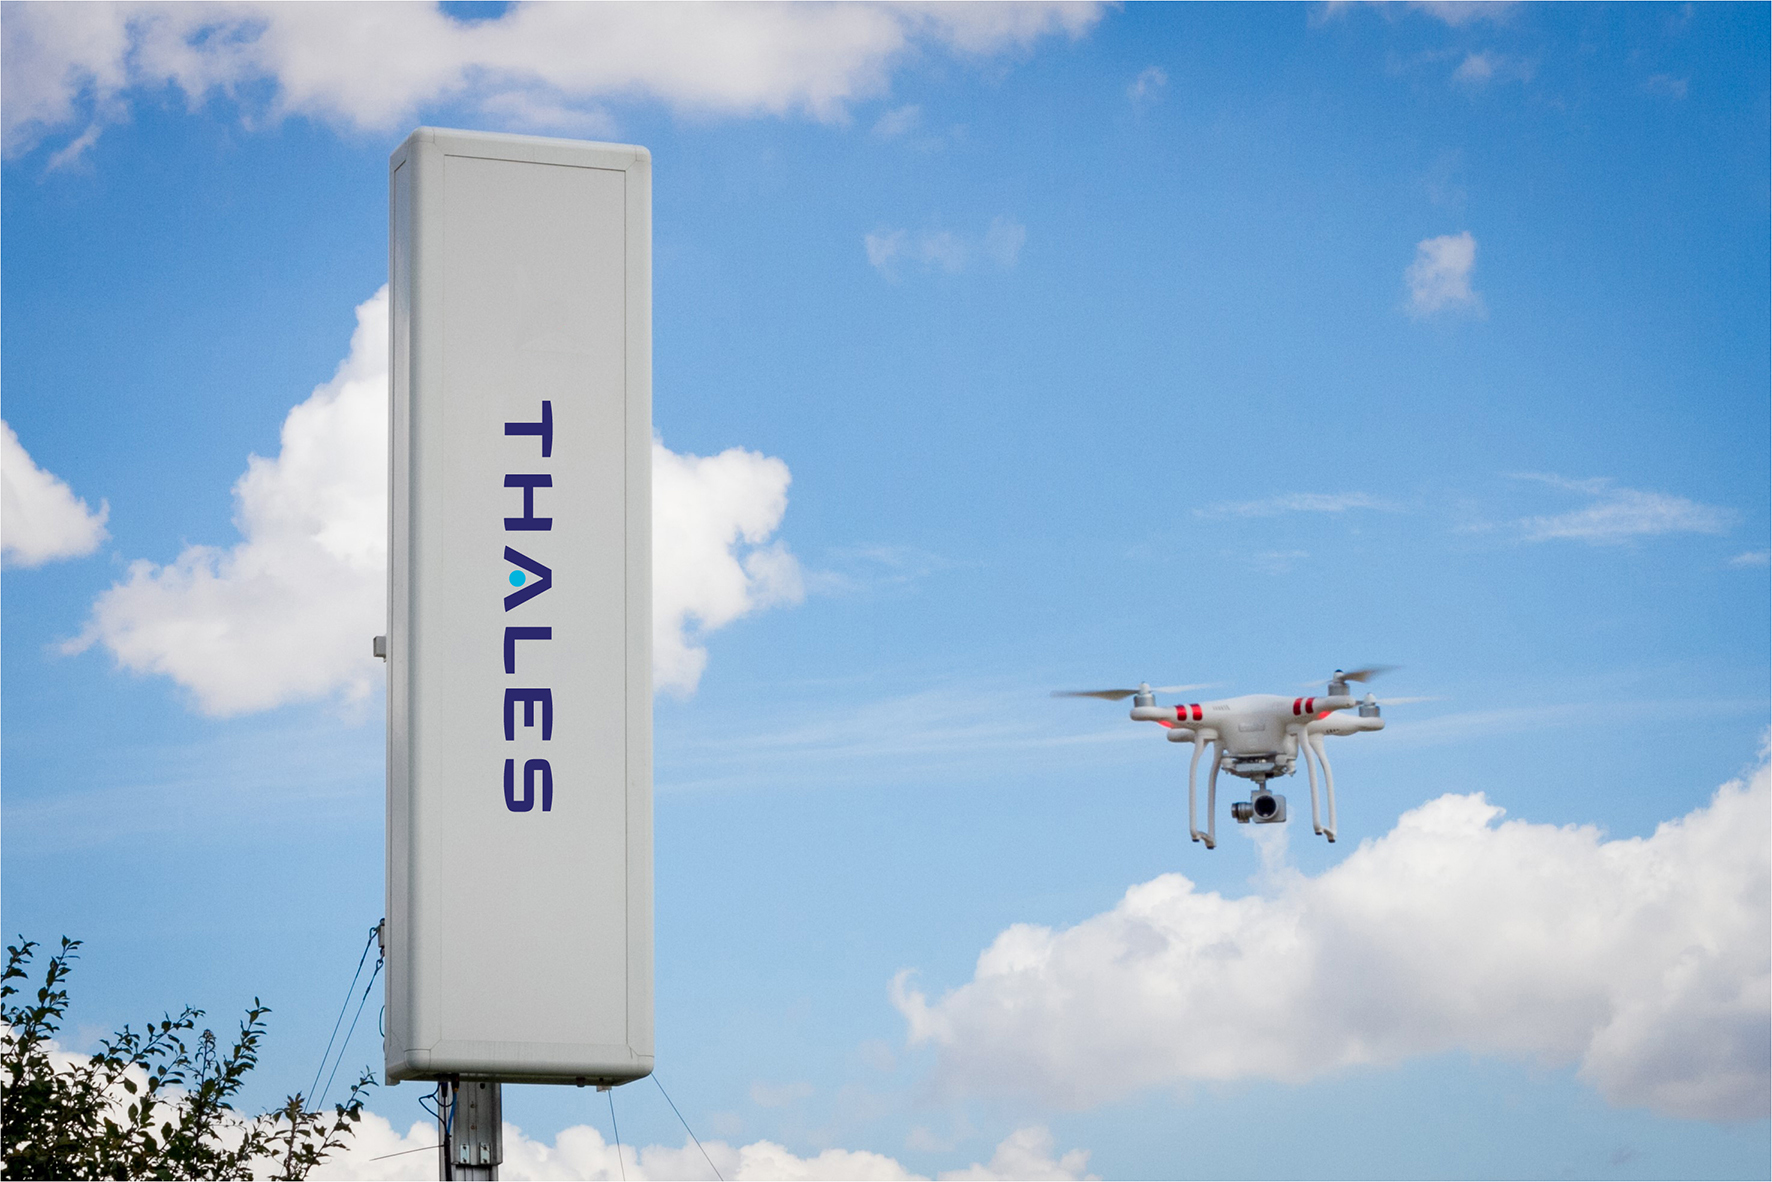 EagleShield – CUAS for Airports- UAS fast detection & identification a must